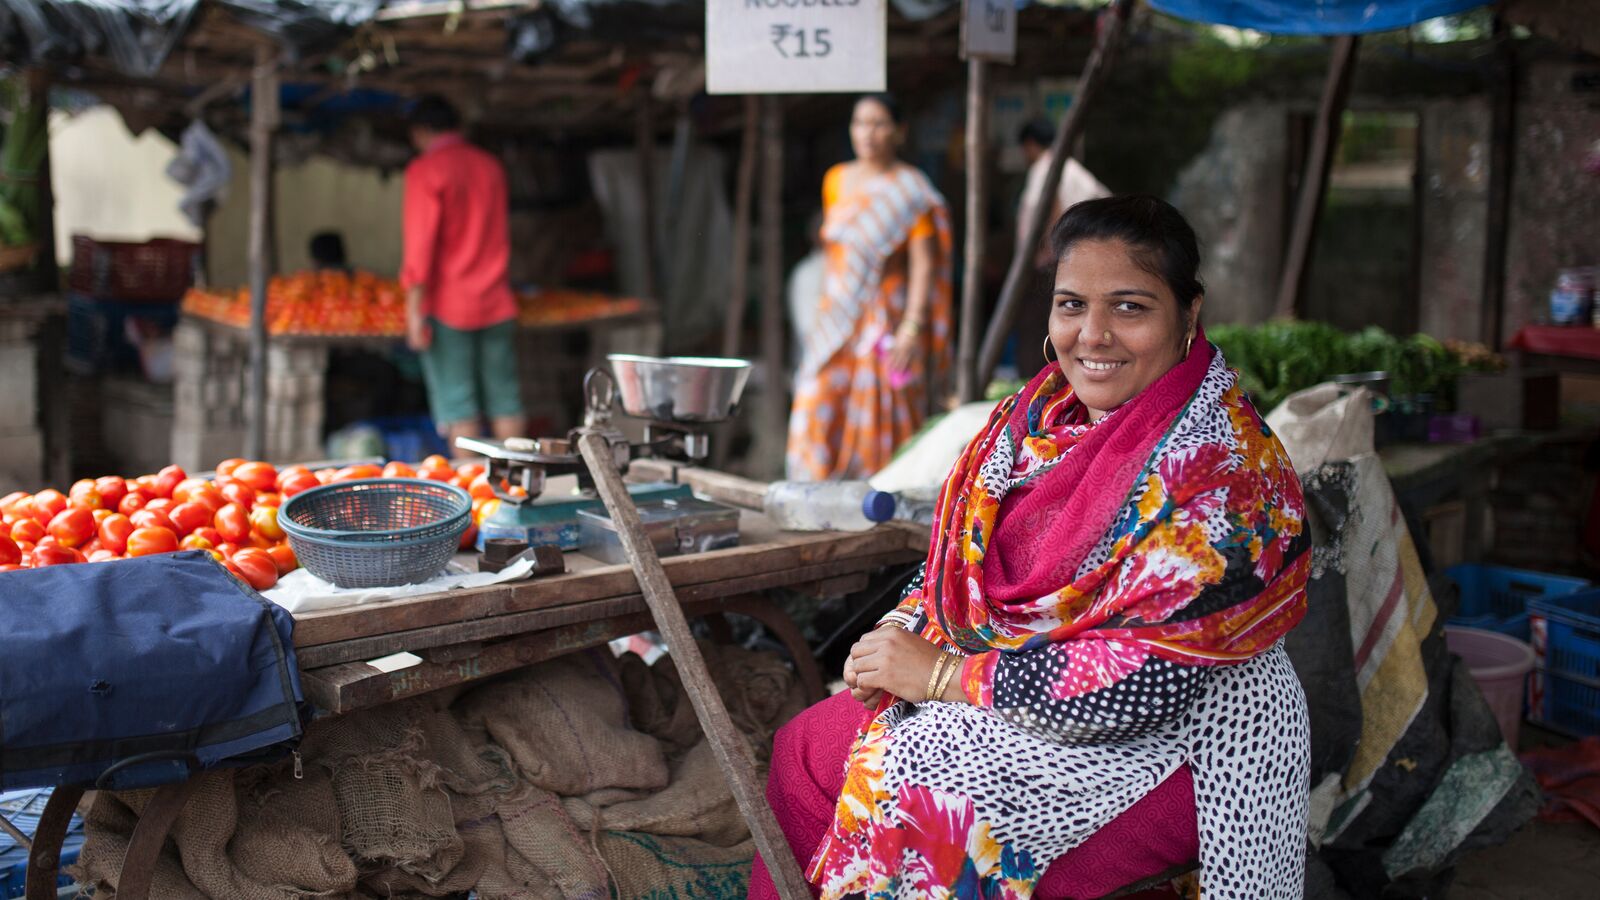 A Svasti customer sits in front of her vegetable stall in an Indian market.